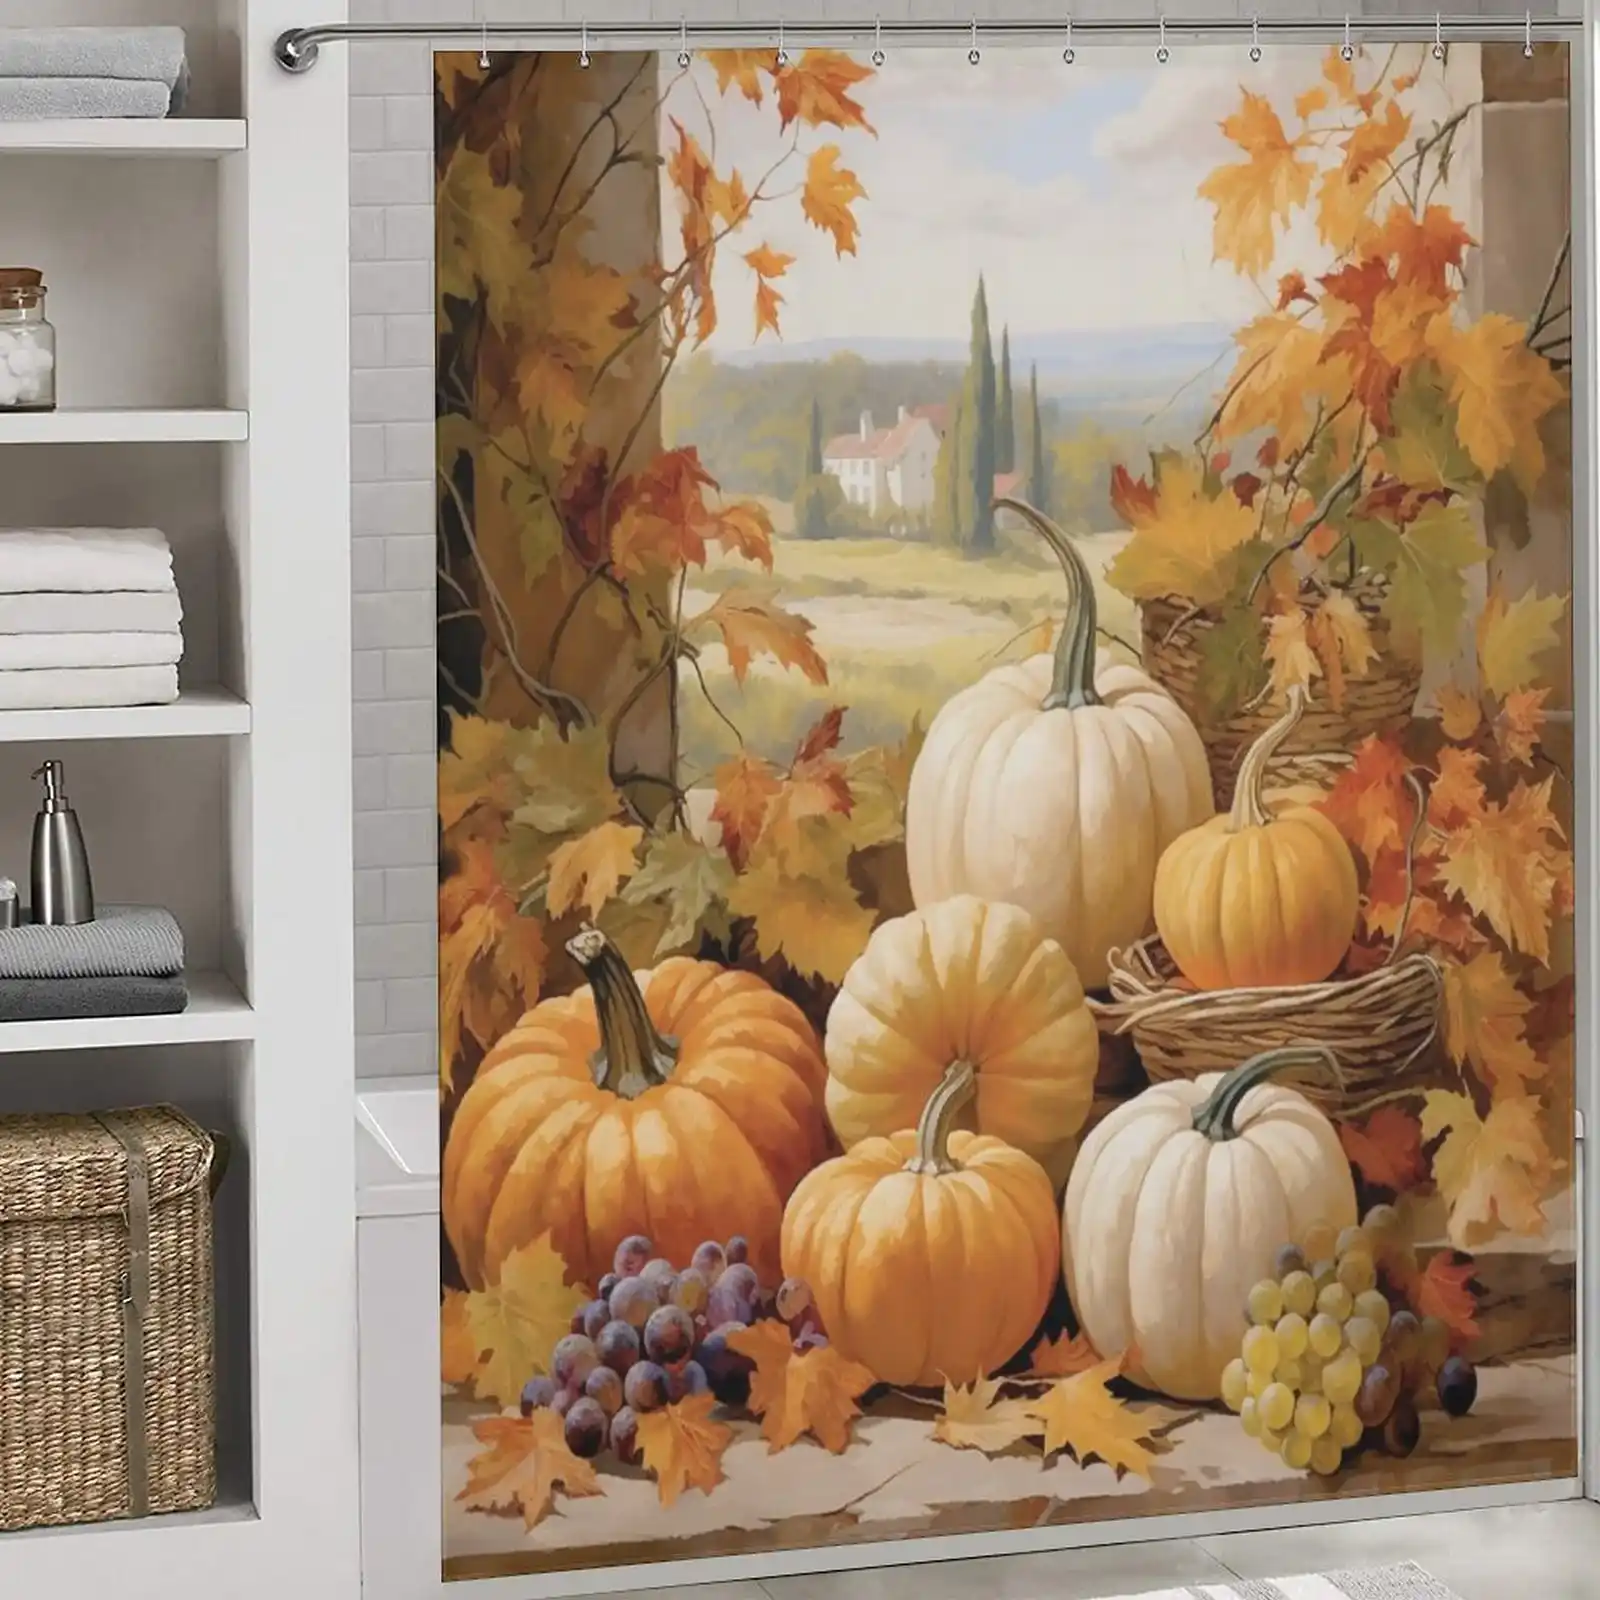 Unique Shower Curtains for Small Bathrooms: A shower curtain with pumpkins and grapes on it.